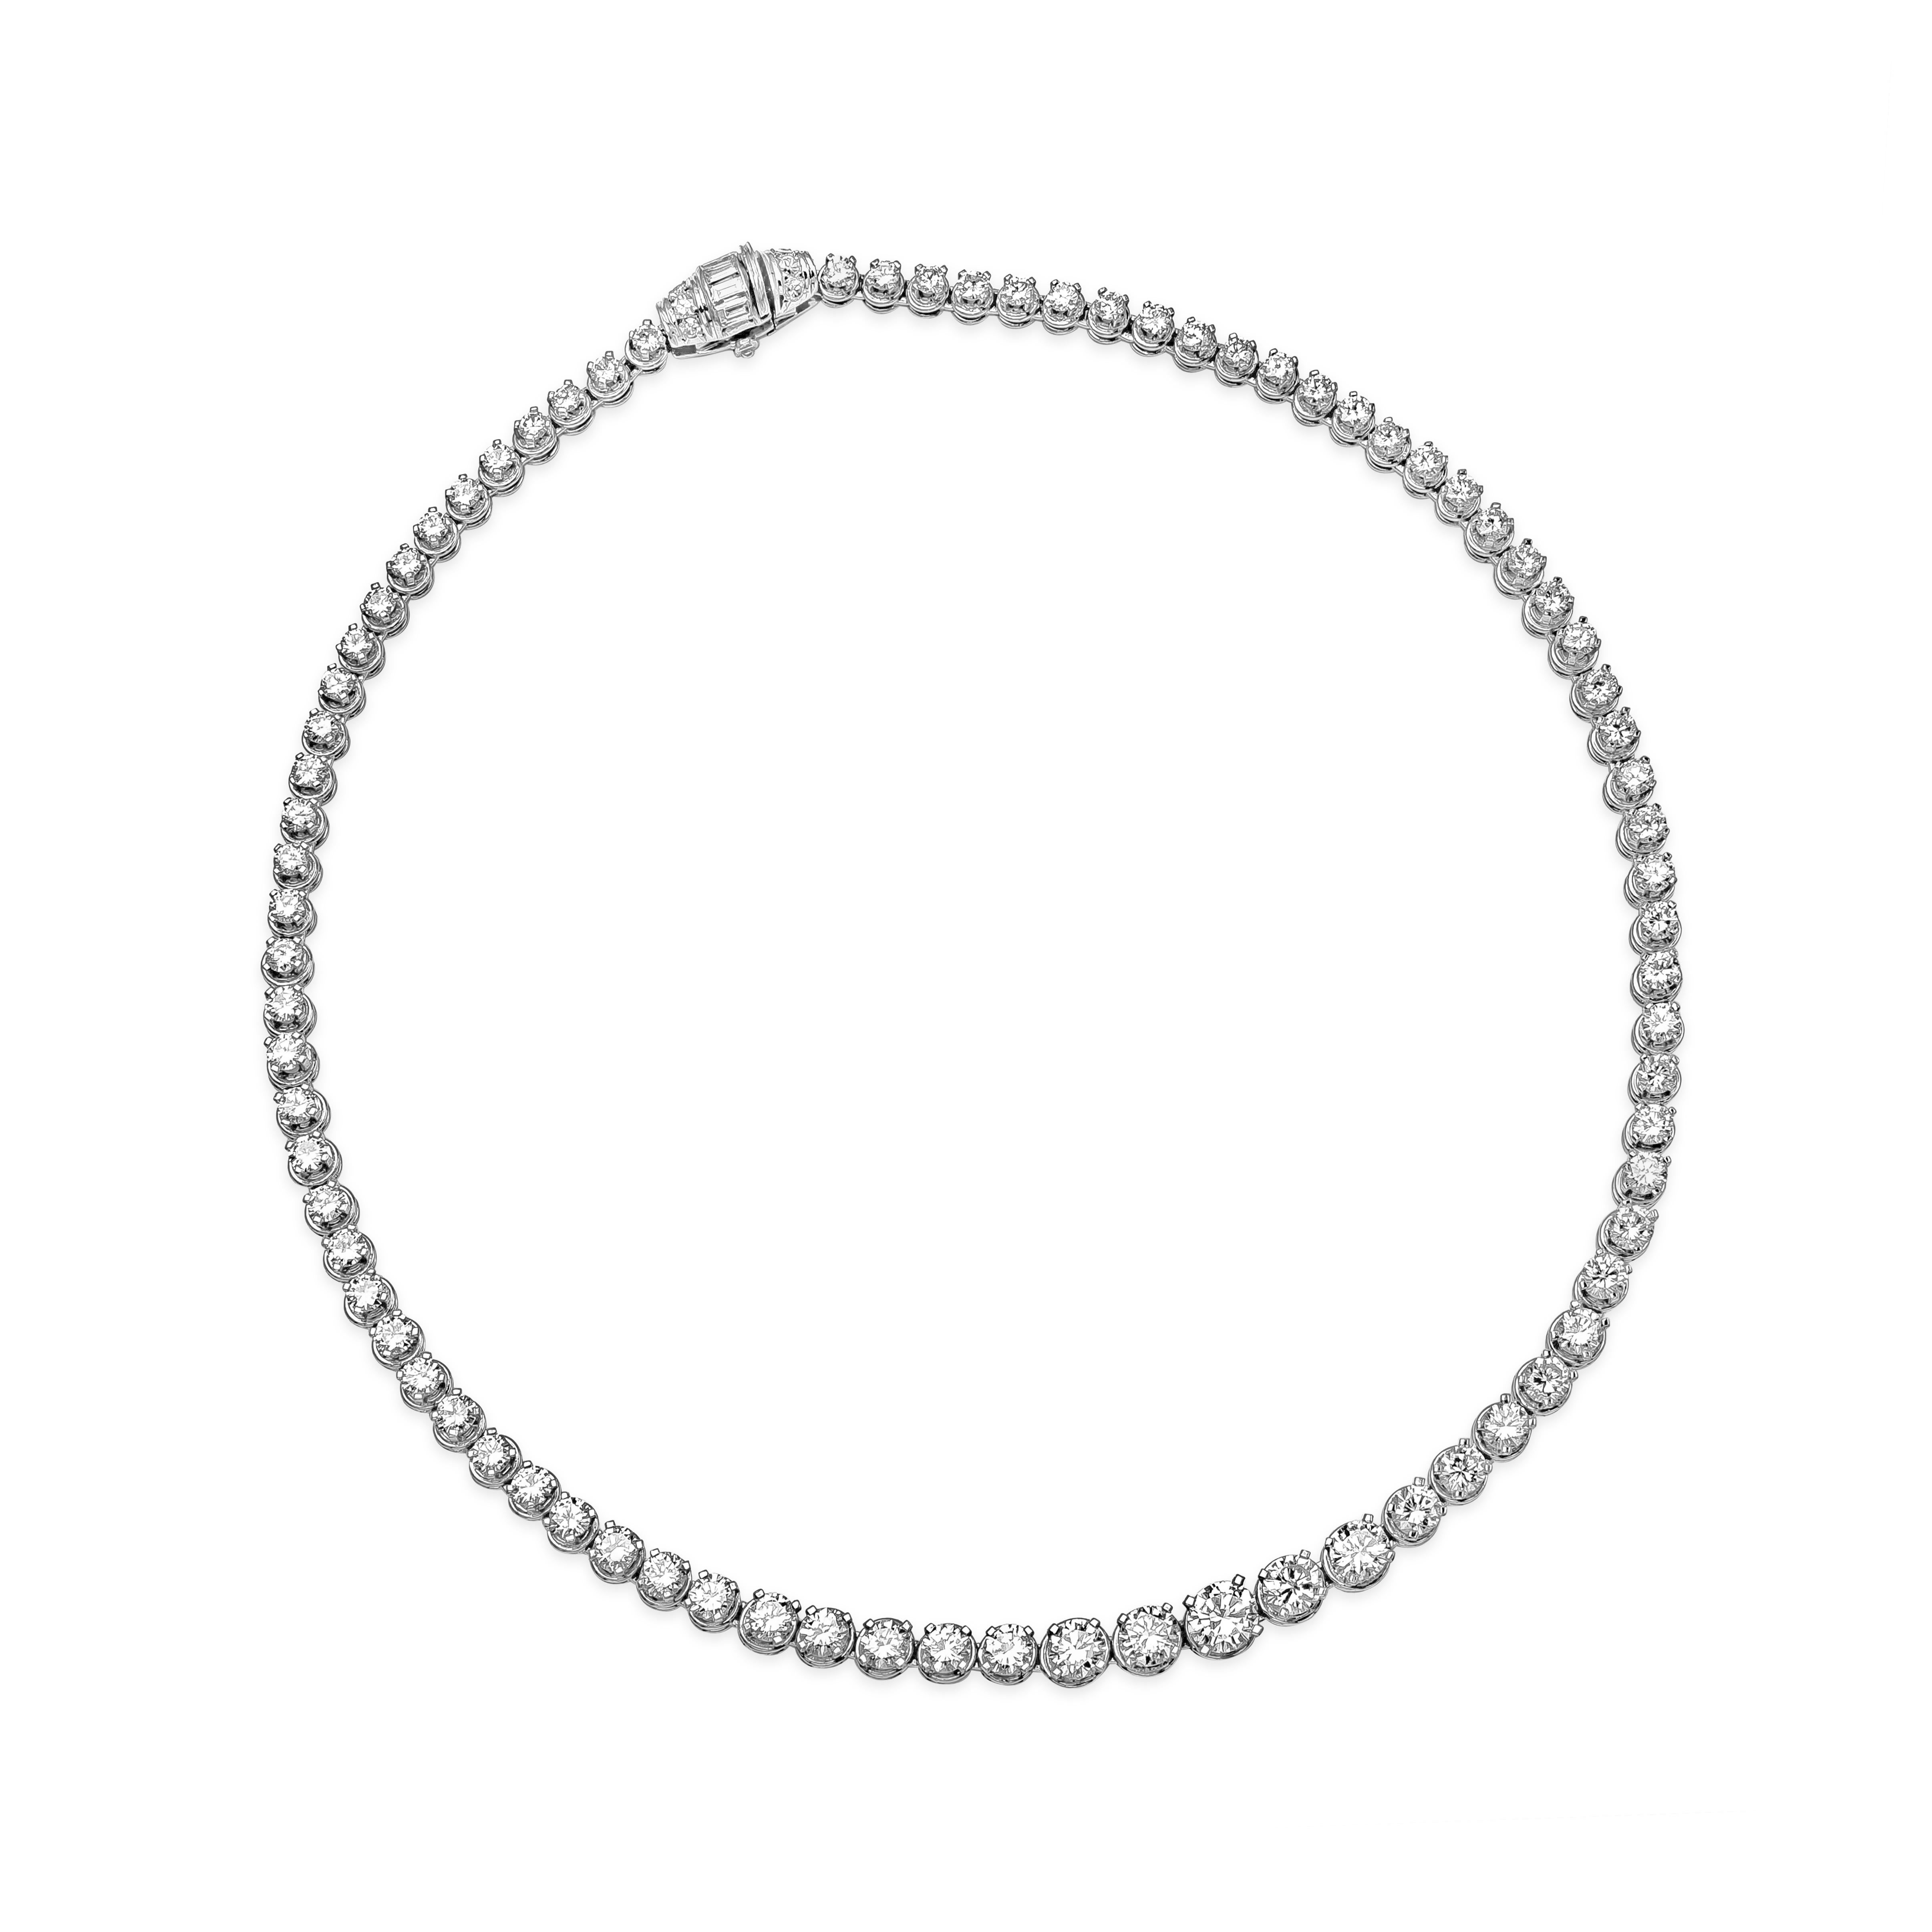 Contemporary Roman Malakov 16.10 Carats Total Round Diamond Tennis Necklace in Platinum For Sale